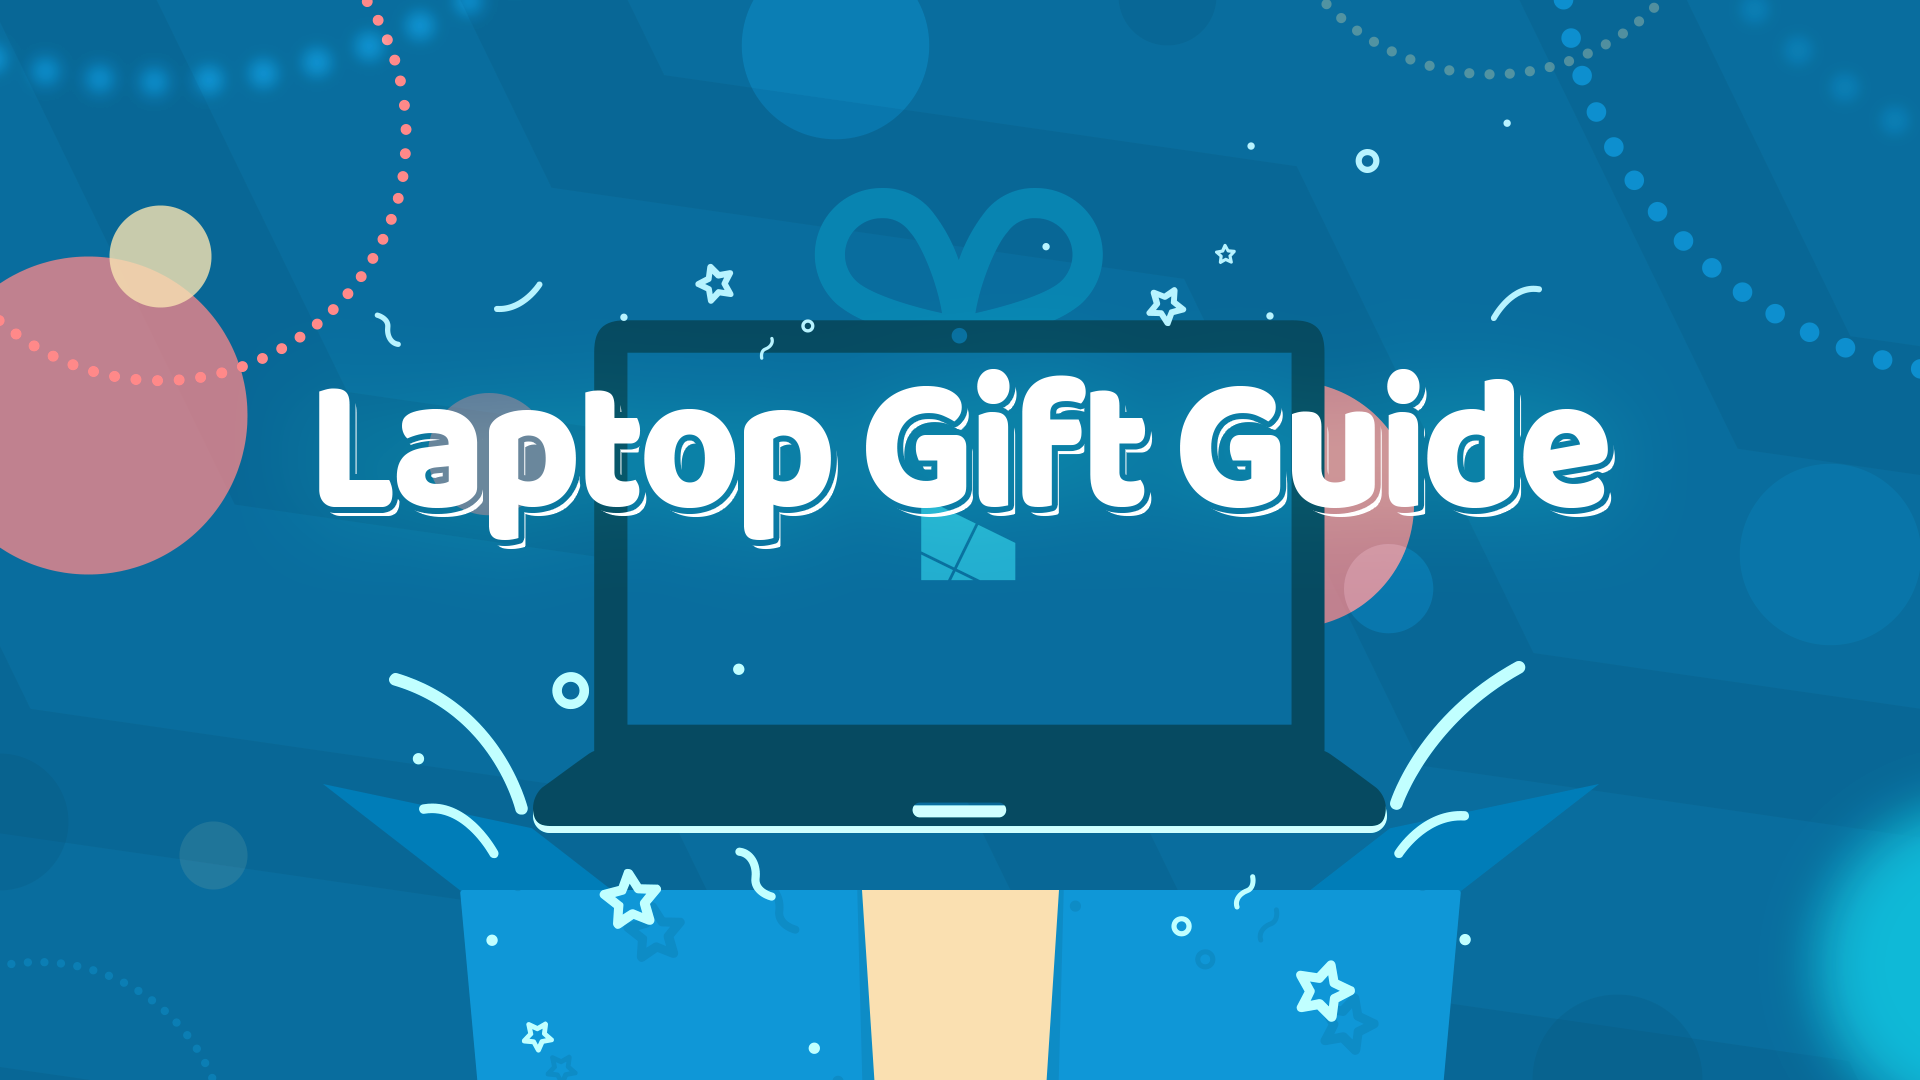 wc-laptop-gift-guide-hero-01.png